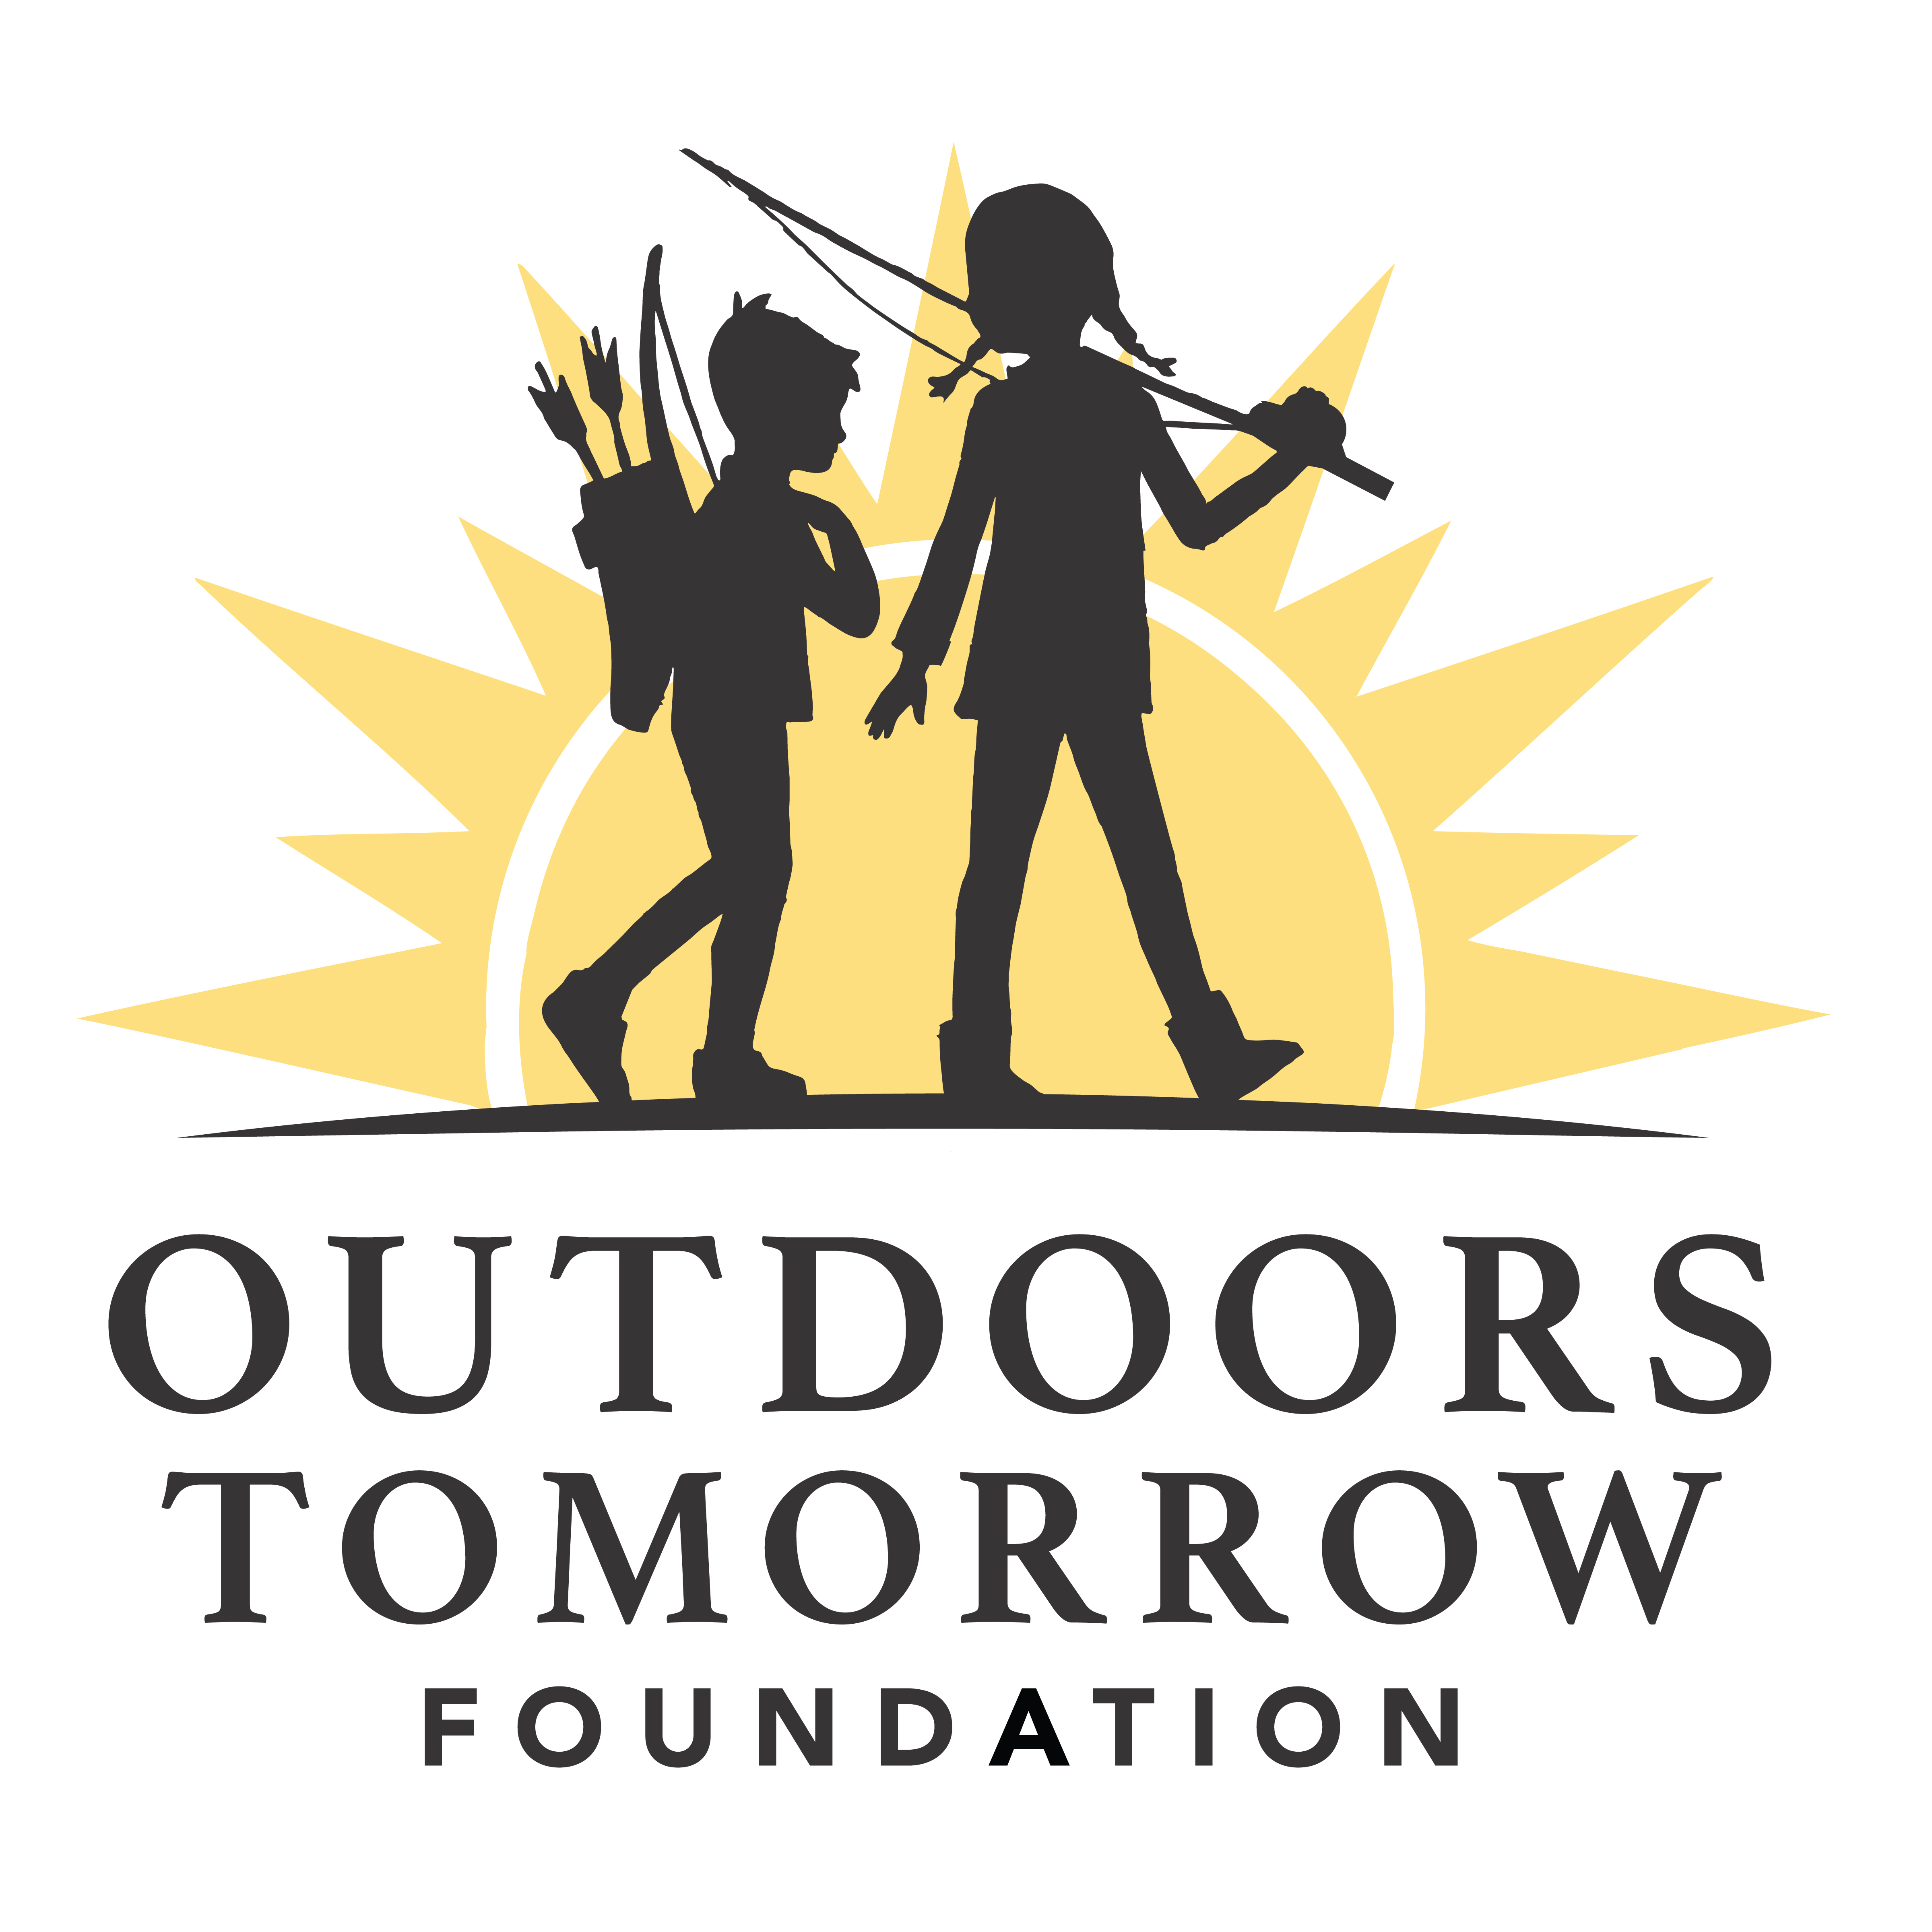 Ft. Worth sporting clays shoot to benefit thousands of students nationwide